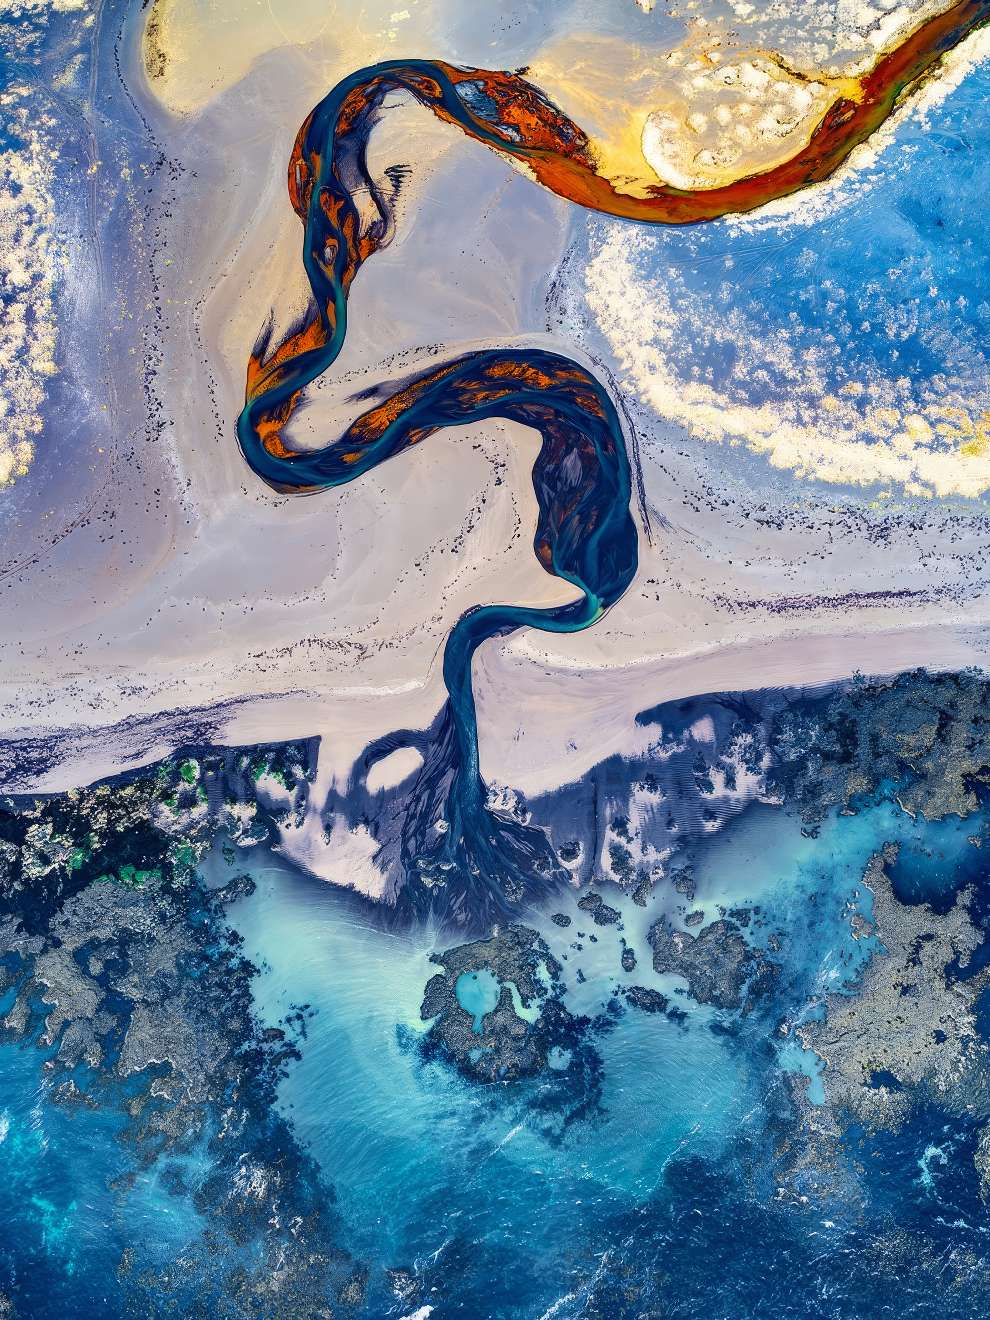 Abstract Drone Photo Awards Winners 03 